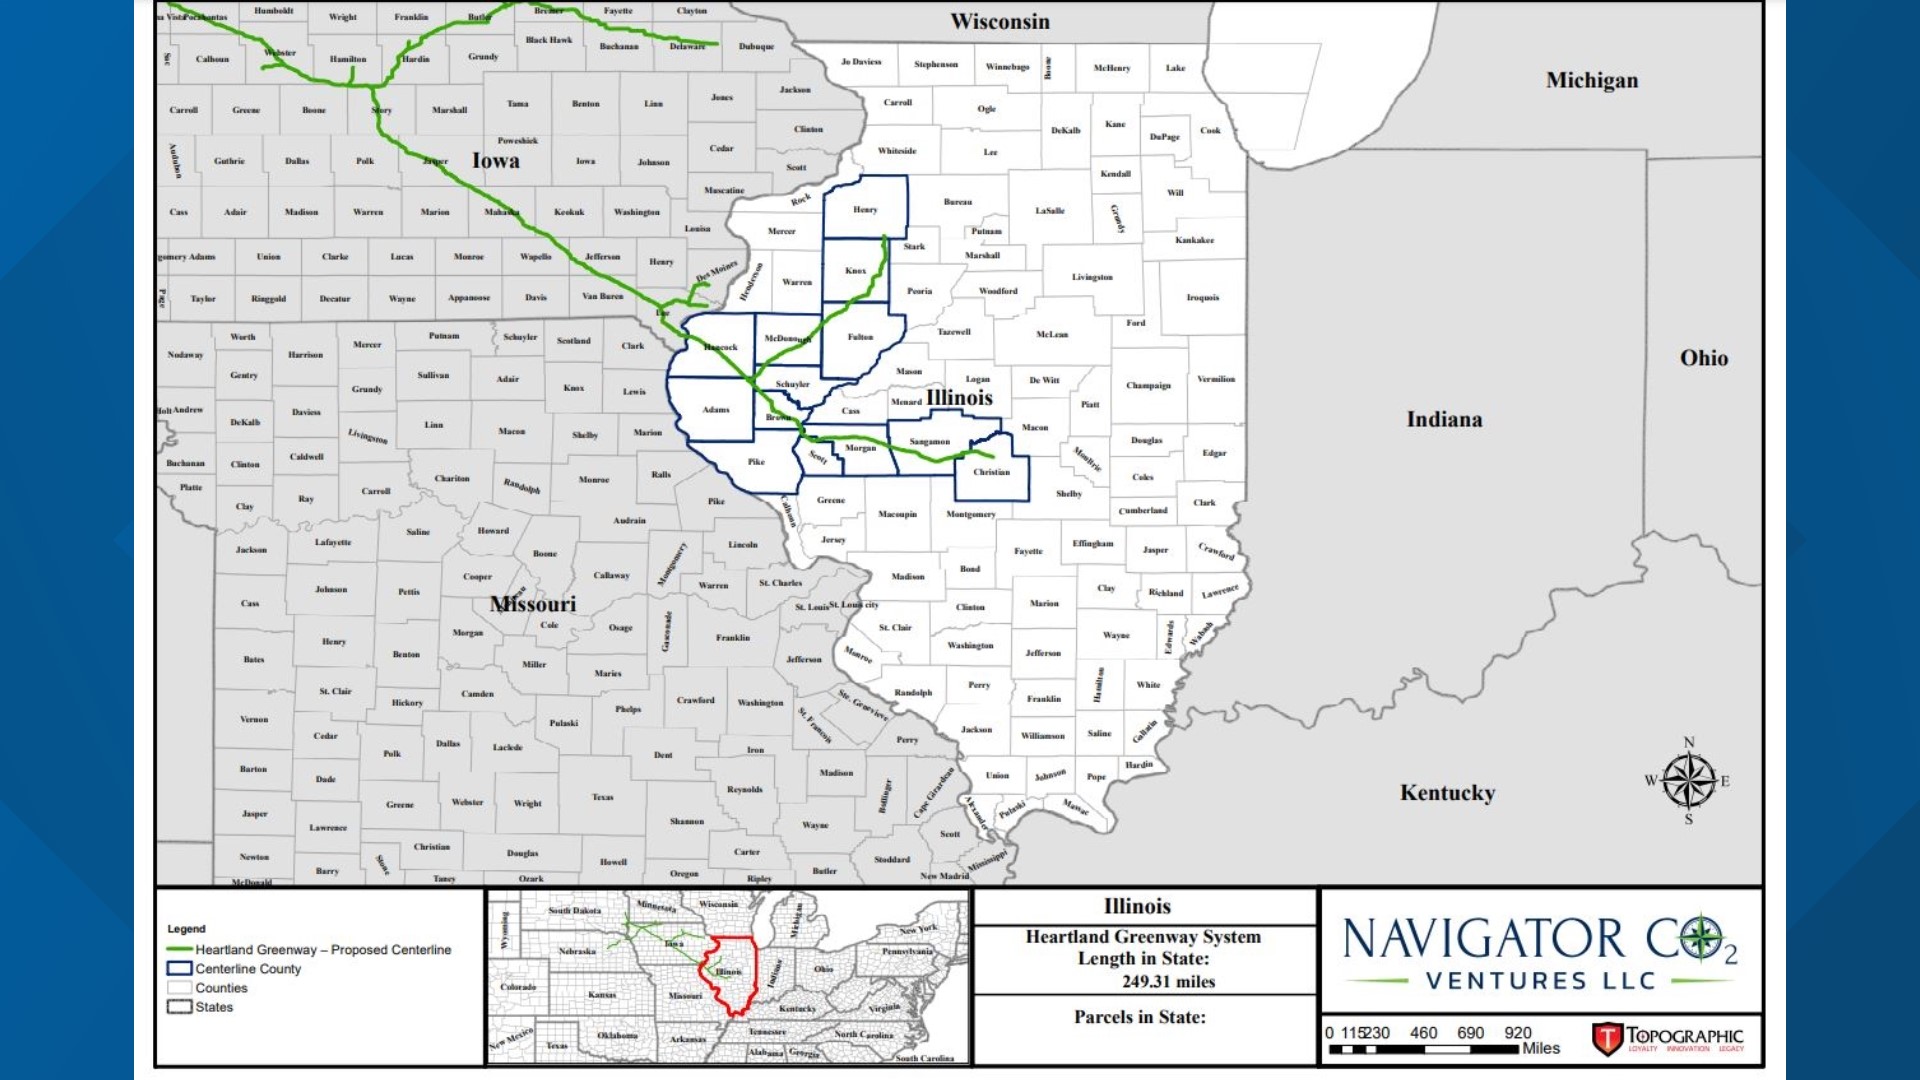 Navigator CO₂ Ventures proposed 1,300-mile long pipeline would run through five Midwestern states, including 13 counties in Illinois.